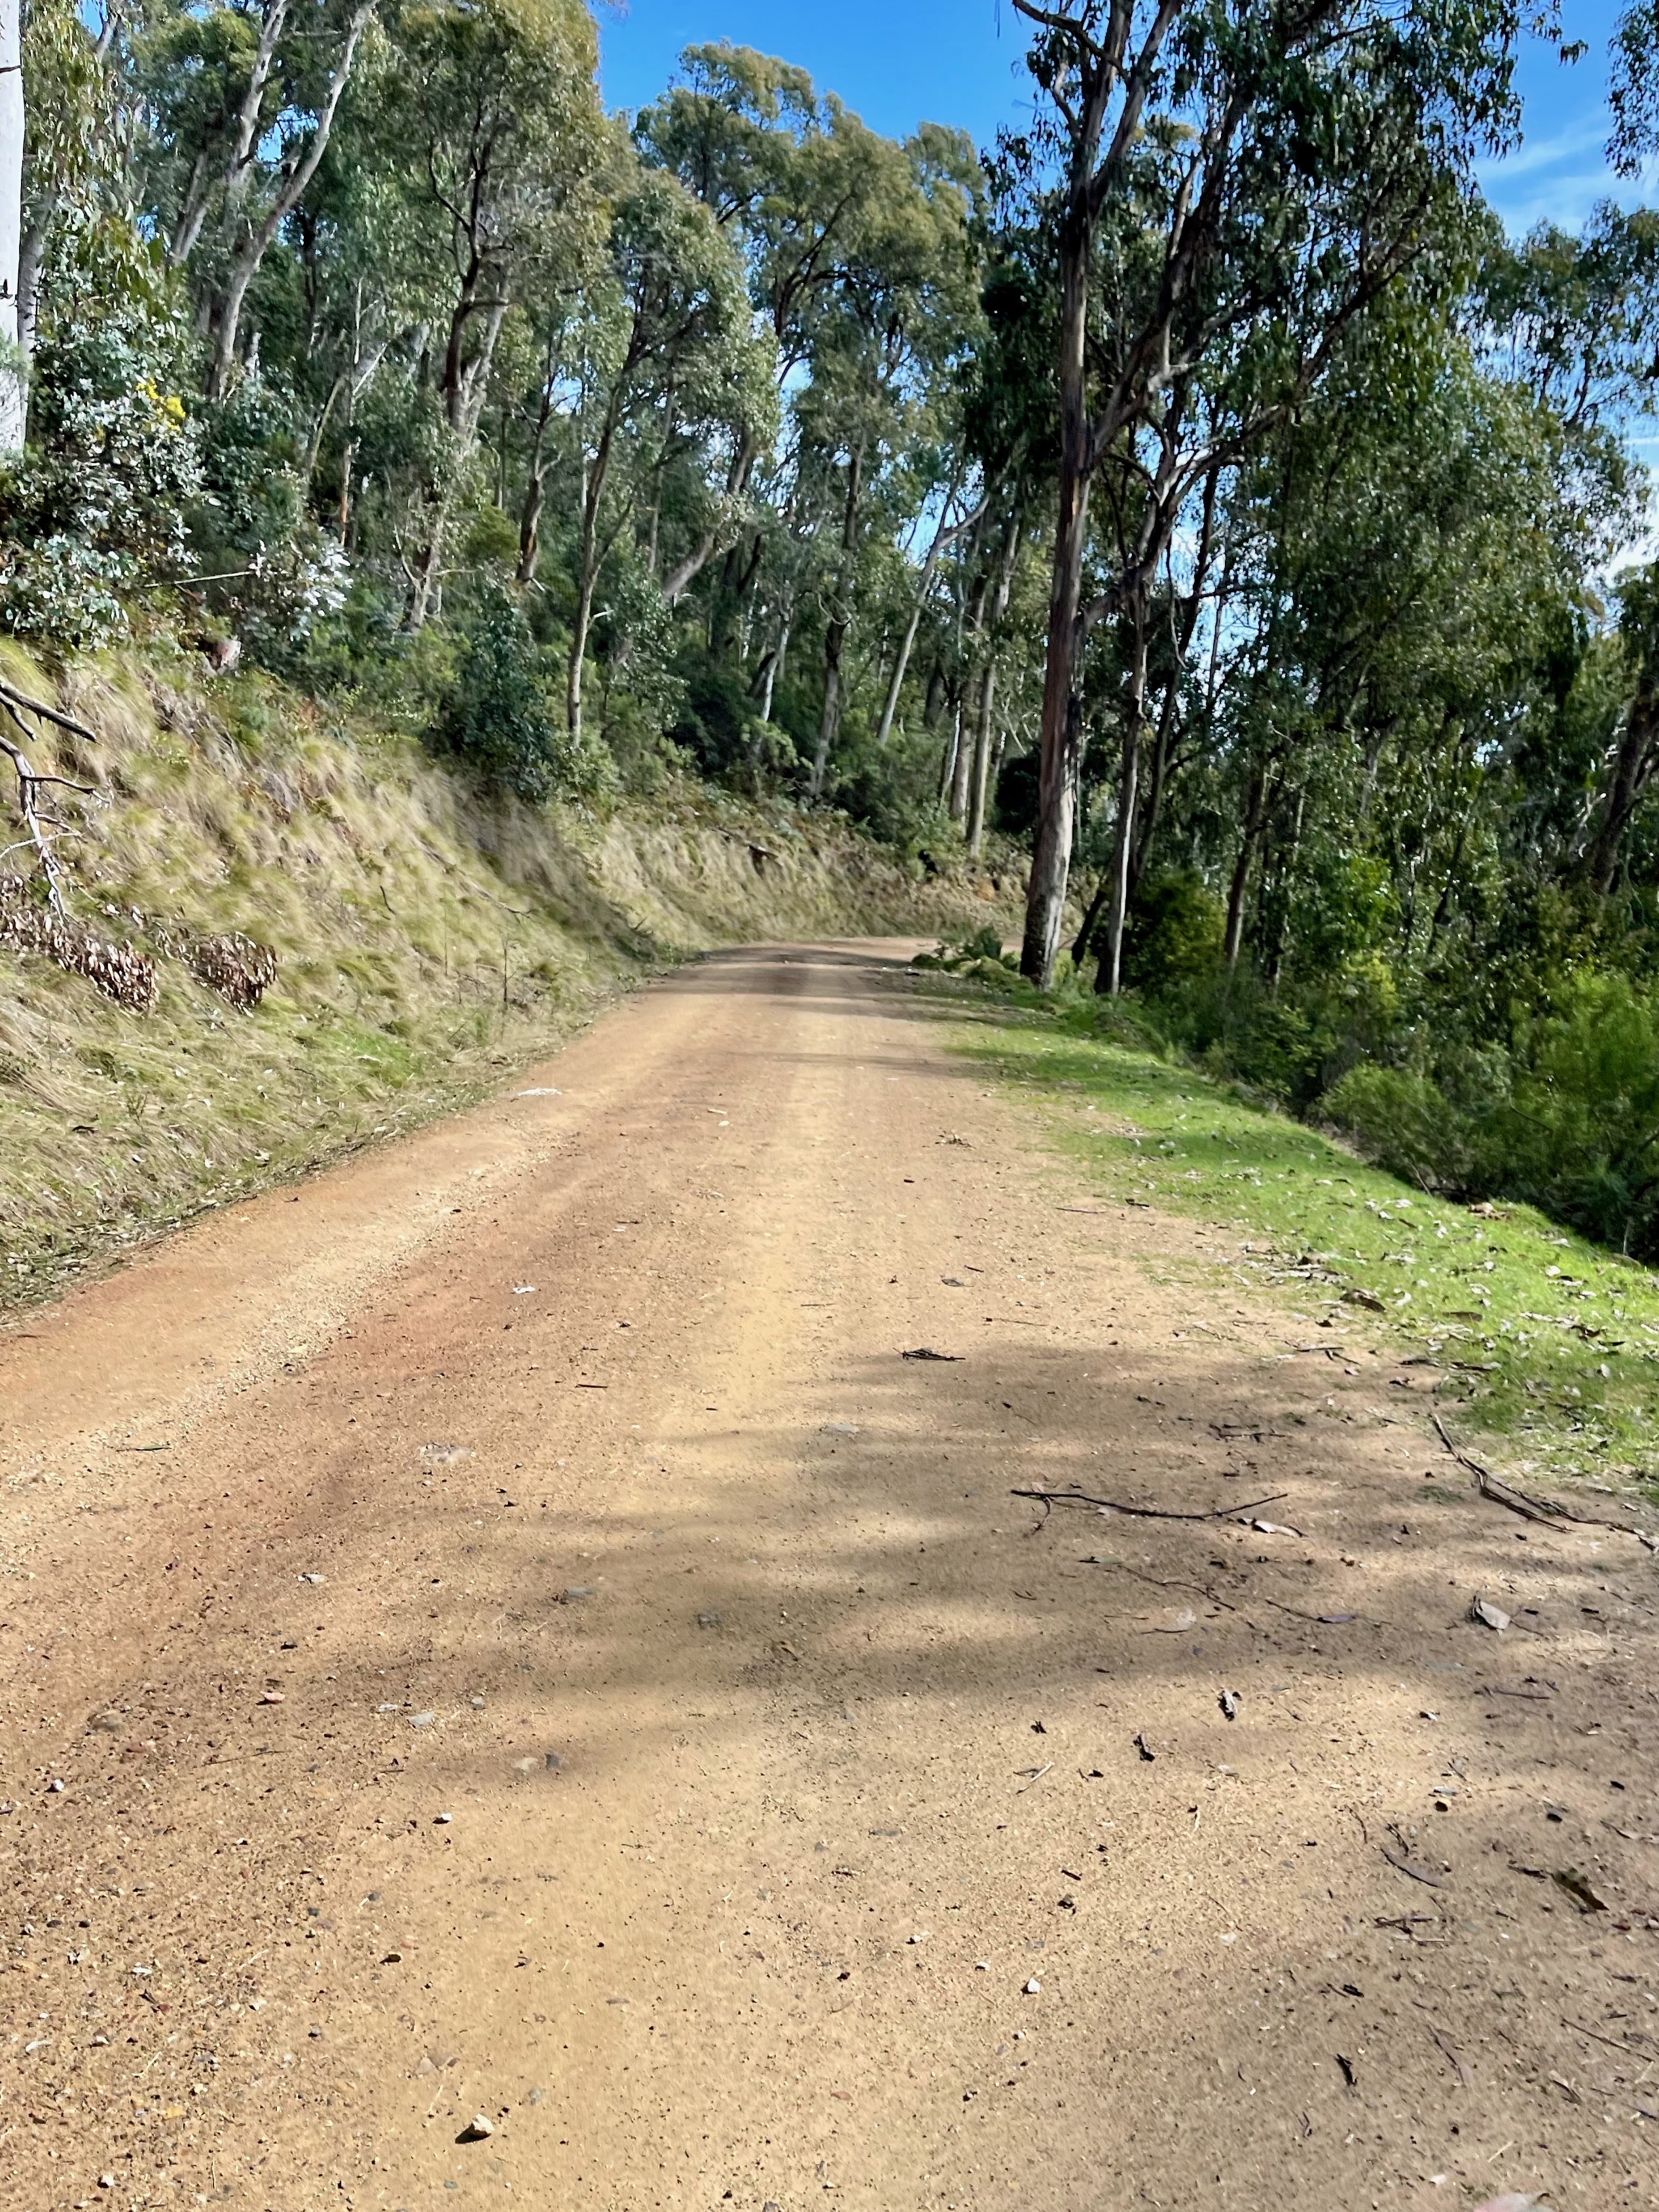 Gravel road winding through native forest 